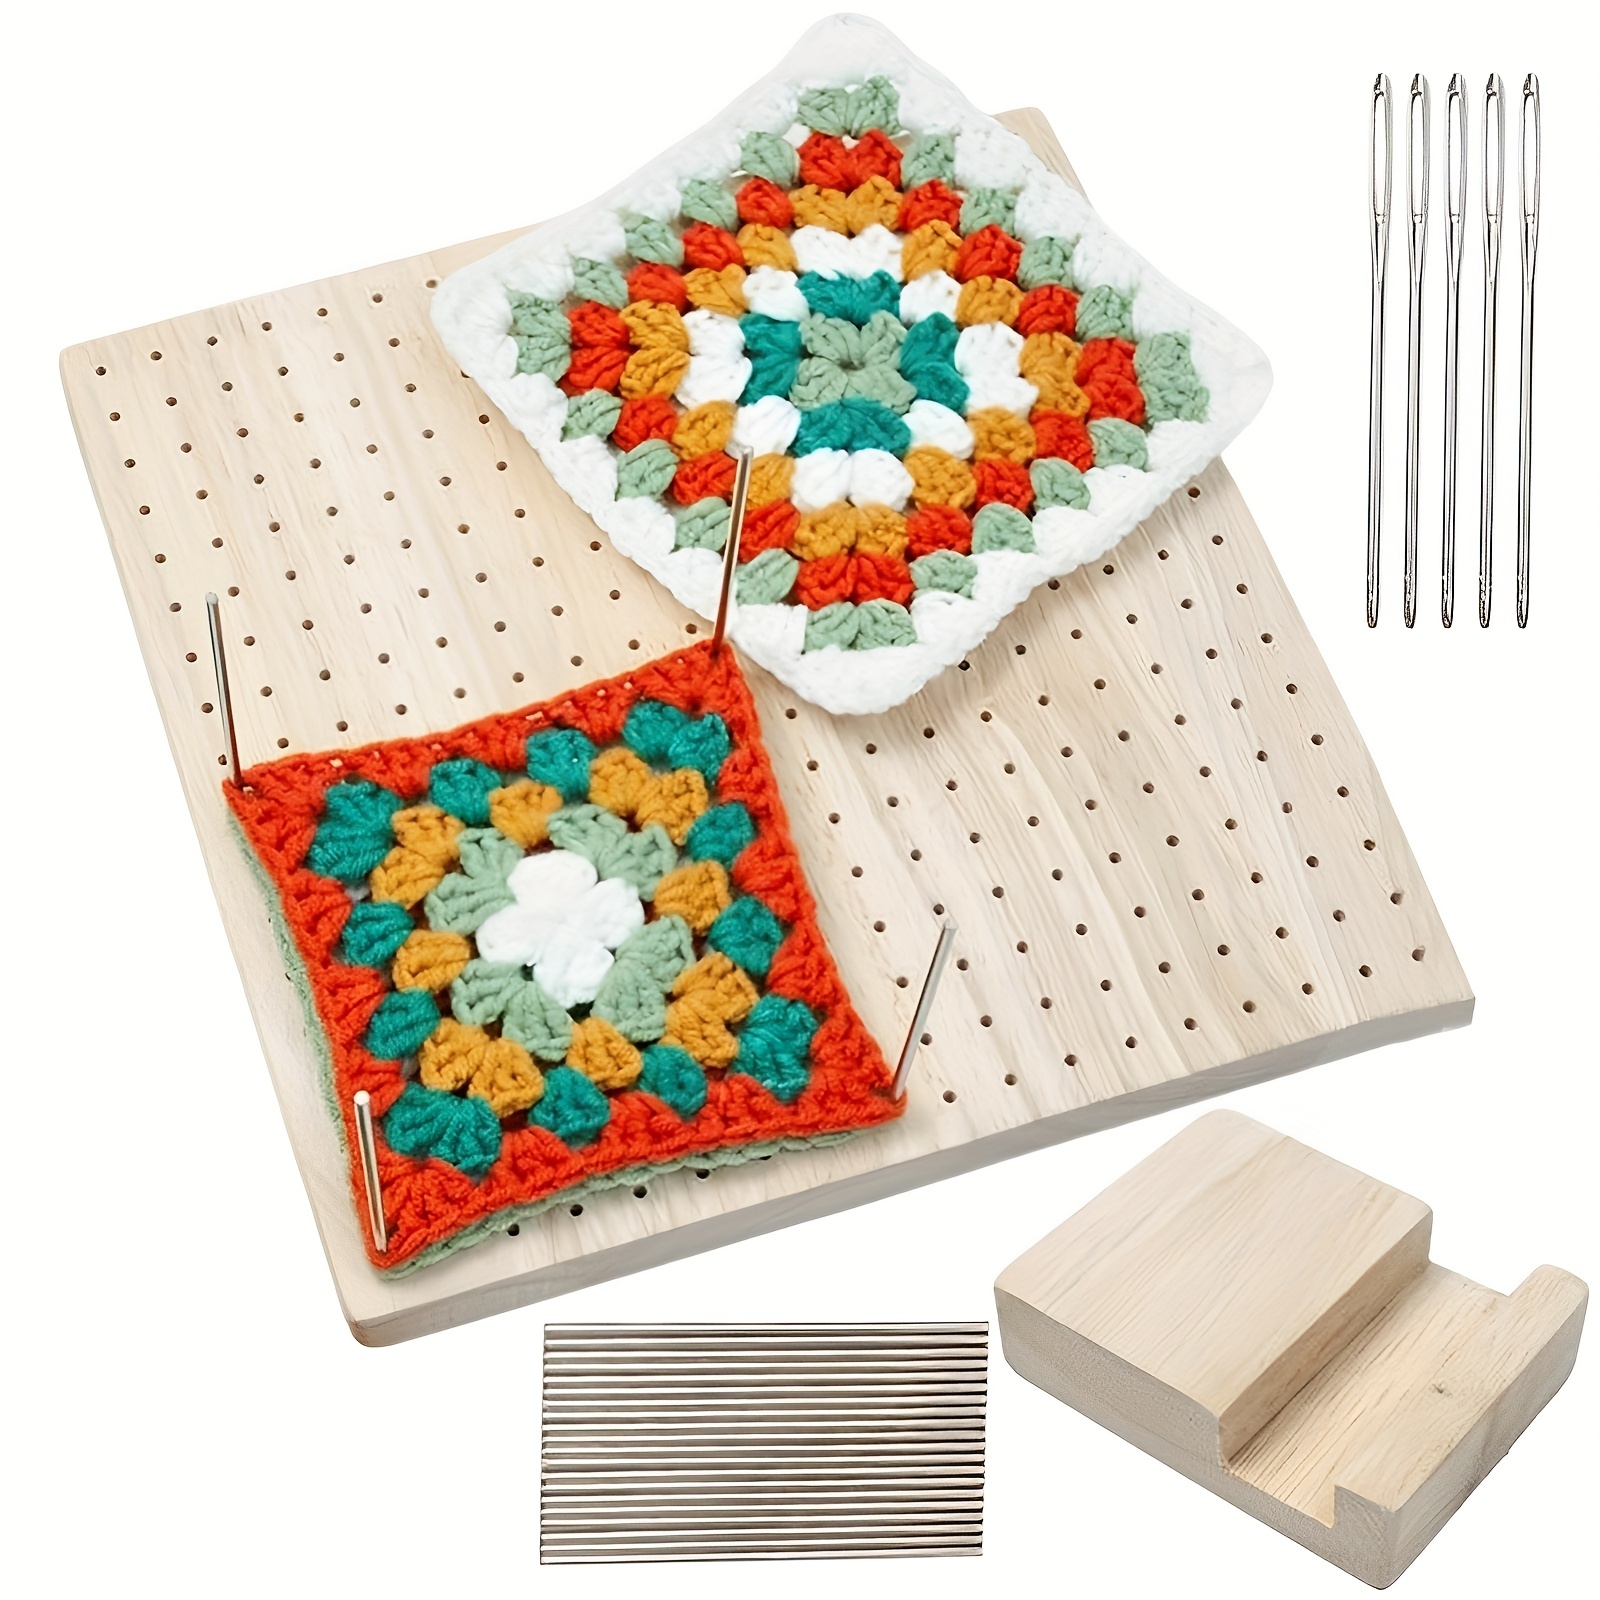  Tebery Bamboo Square Crochet Blocking Board with 20Pcs Rob Pins  for Knitting Crochet and Granny, Handcrafted Knitting Blocking Mat with 12  Colors Yarn and Knitting Base,7.8 x 7.8 inches